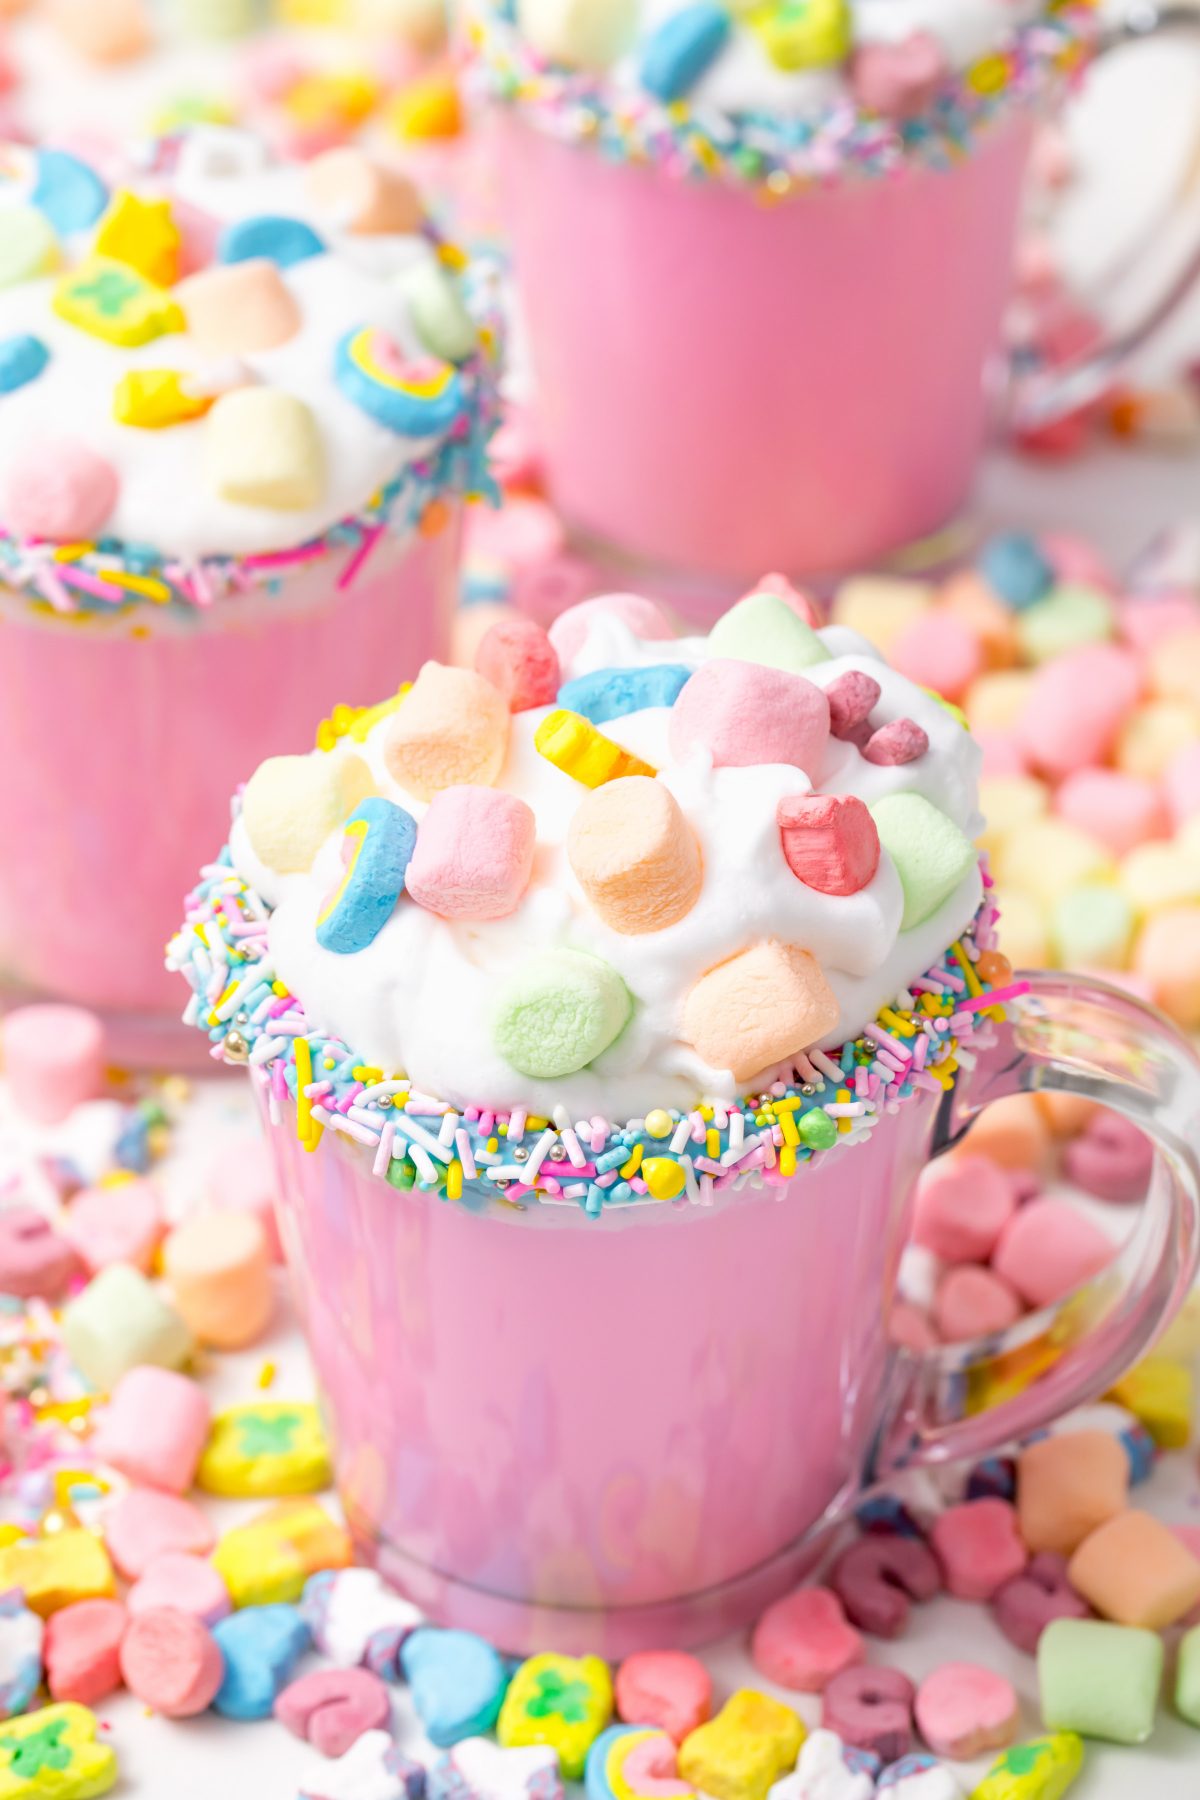 5D4B3163 - Unicorn Hot Chocolate - pink hot chocolate with whipping cream, lucky charms marshmellows on a white table